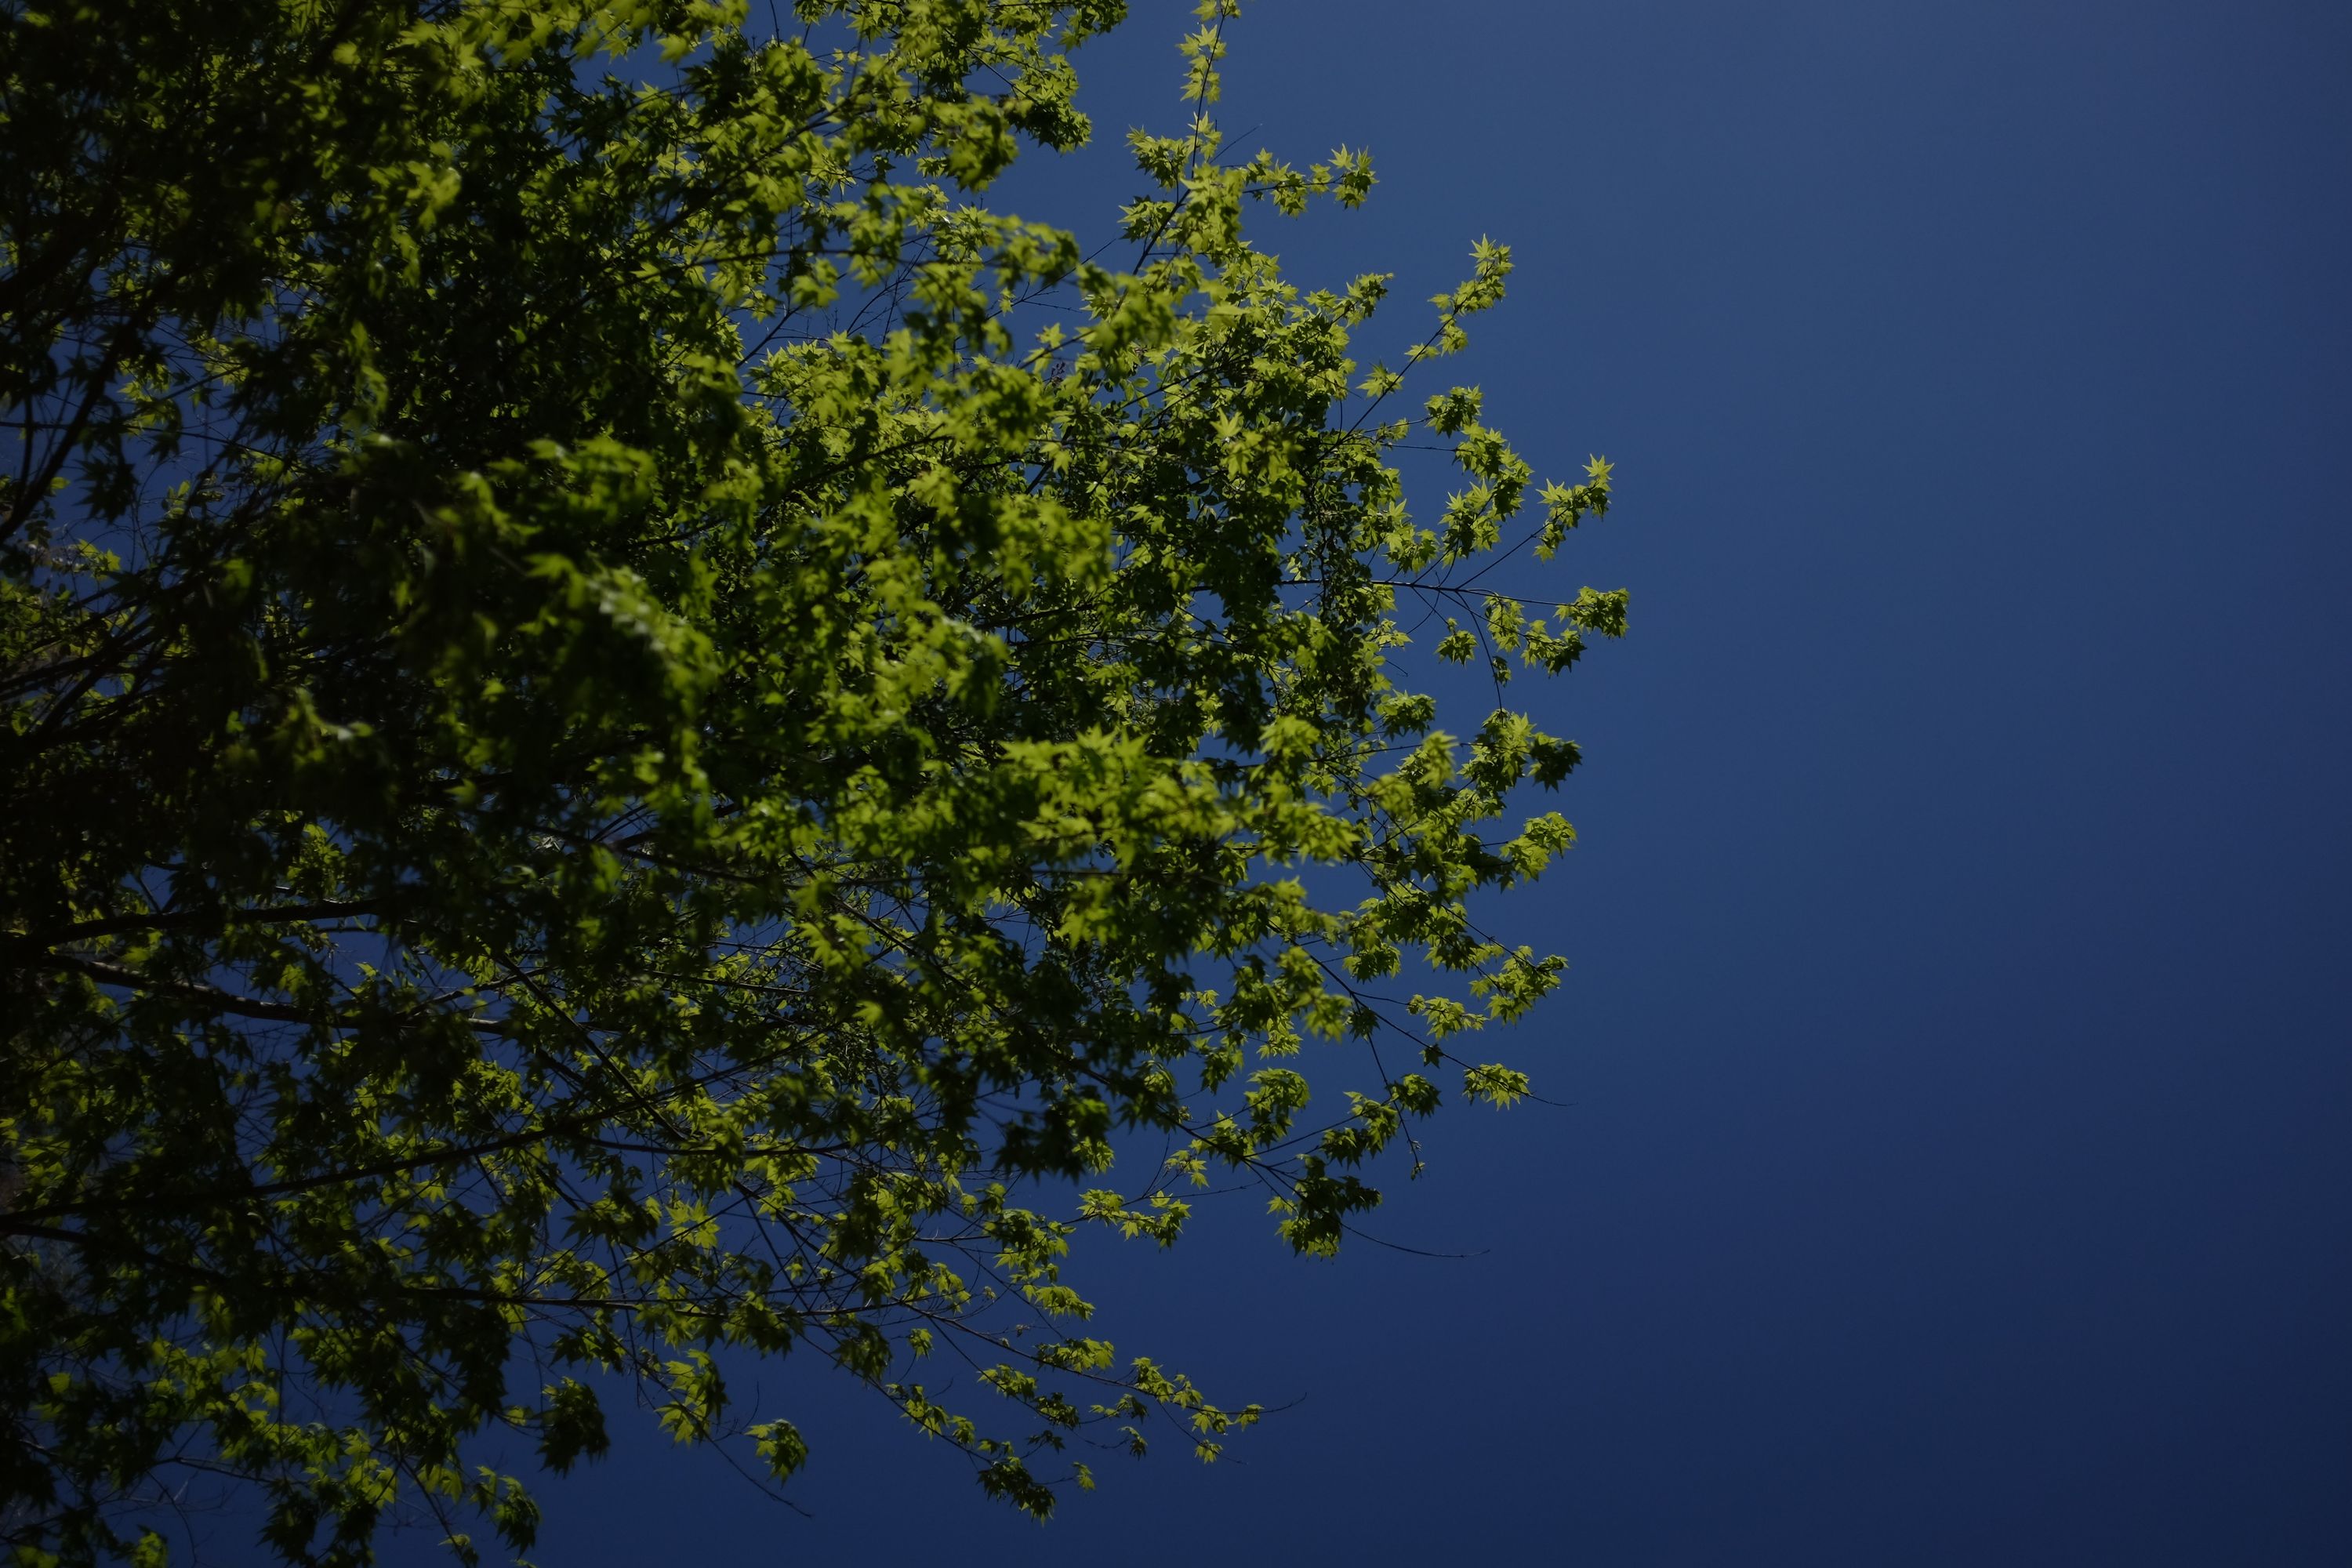 A maple tree against a bright blue sky.